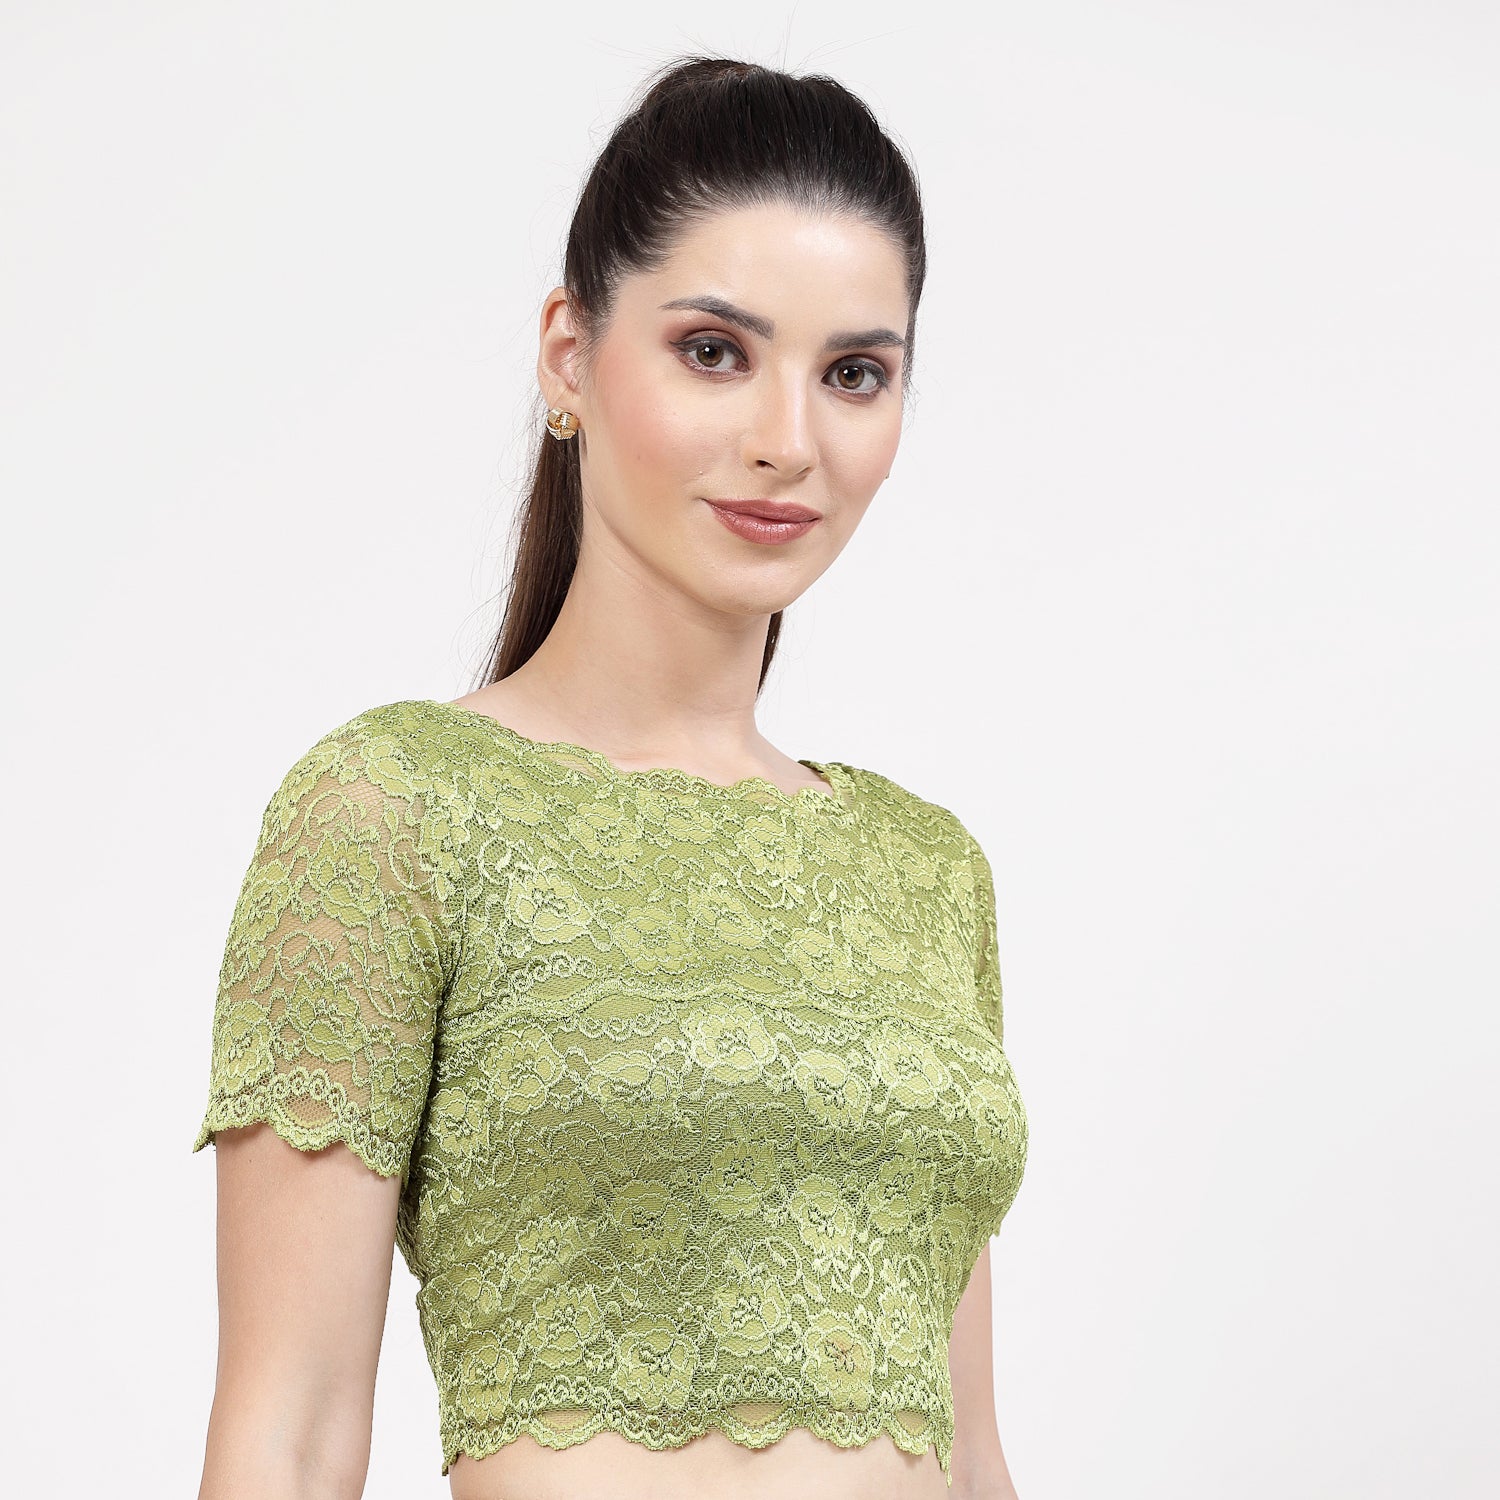 Neon Green Lace Blouse